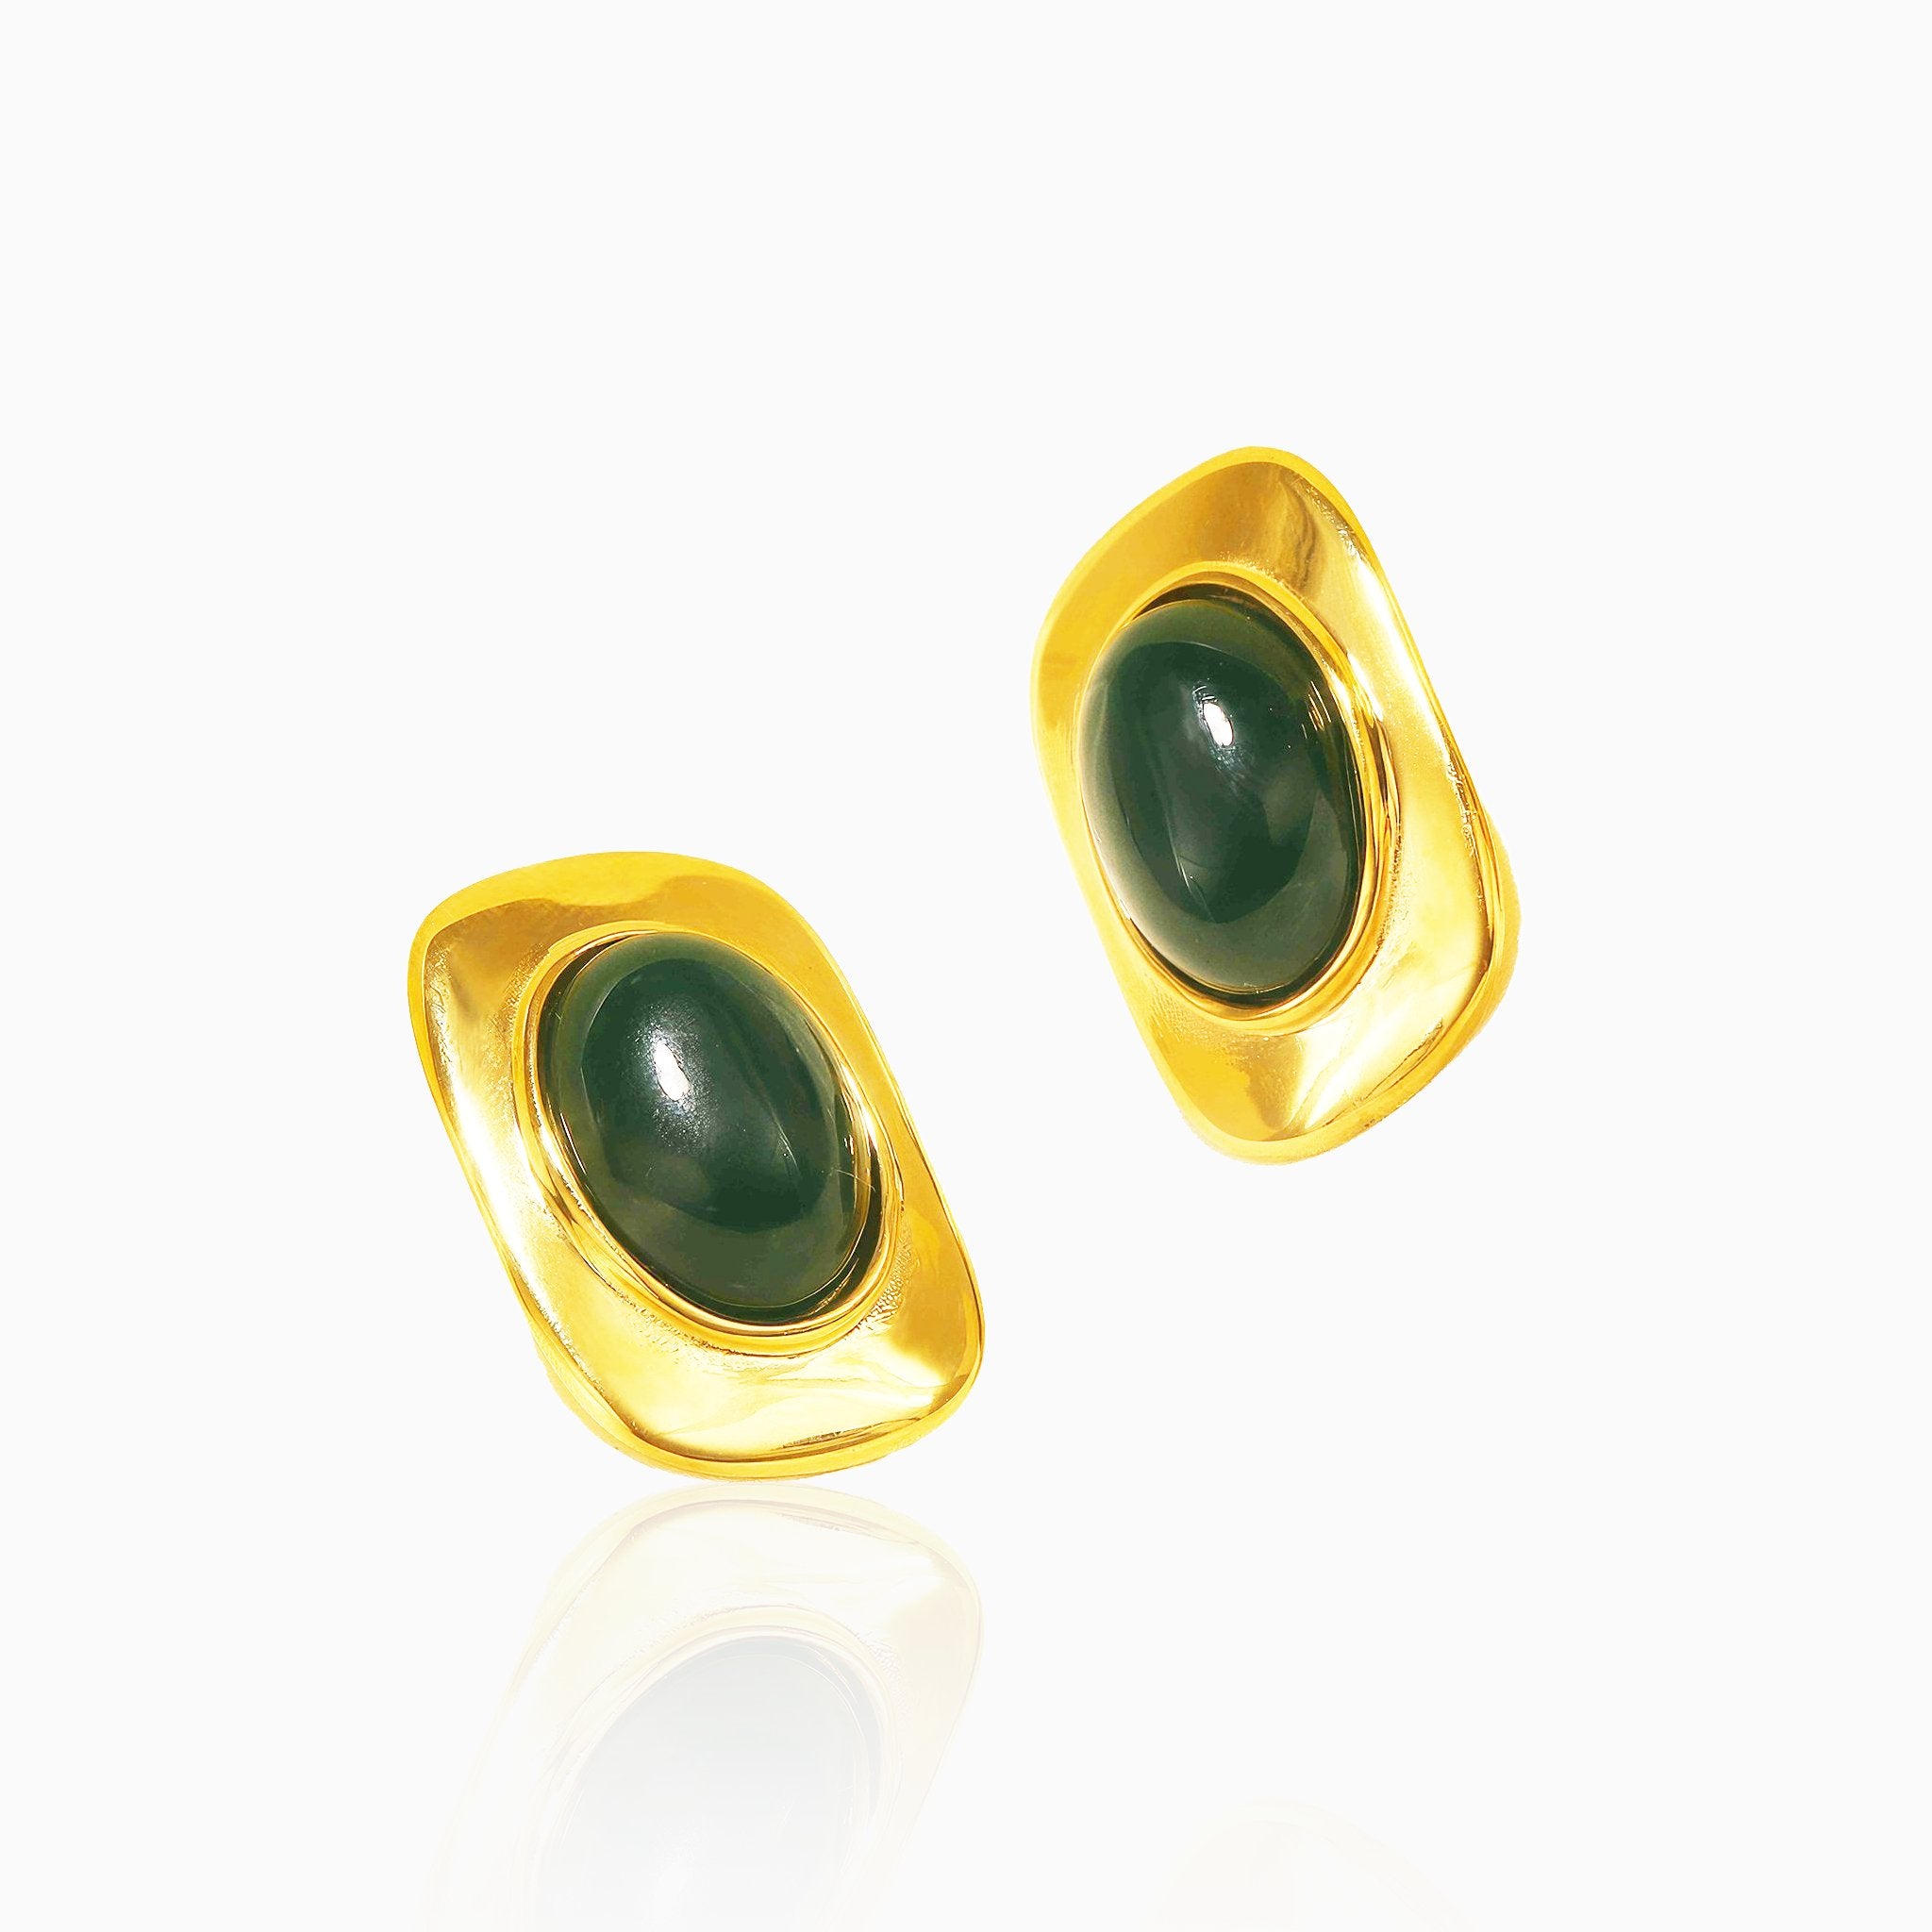 Oval Design Earrings - Nobbier - Earrings - 18K Gold And Titanium PVD Coated Jewelry